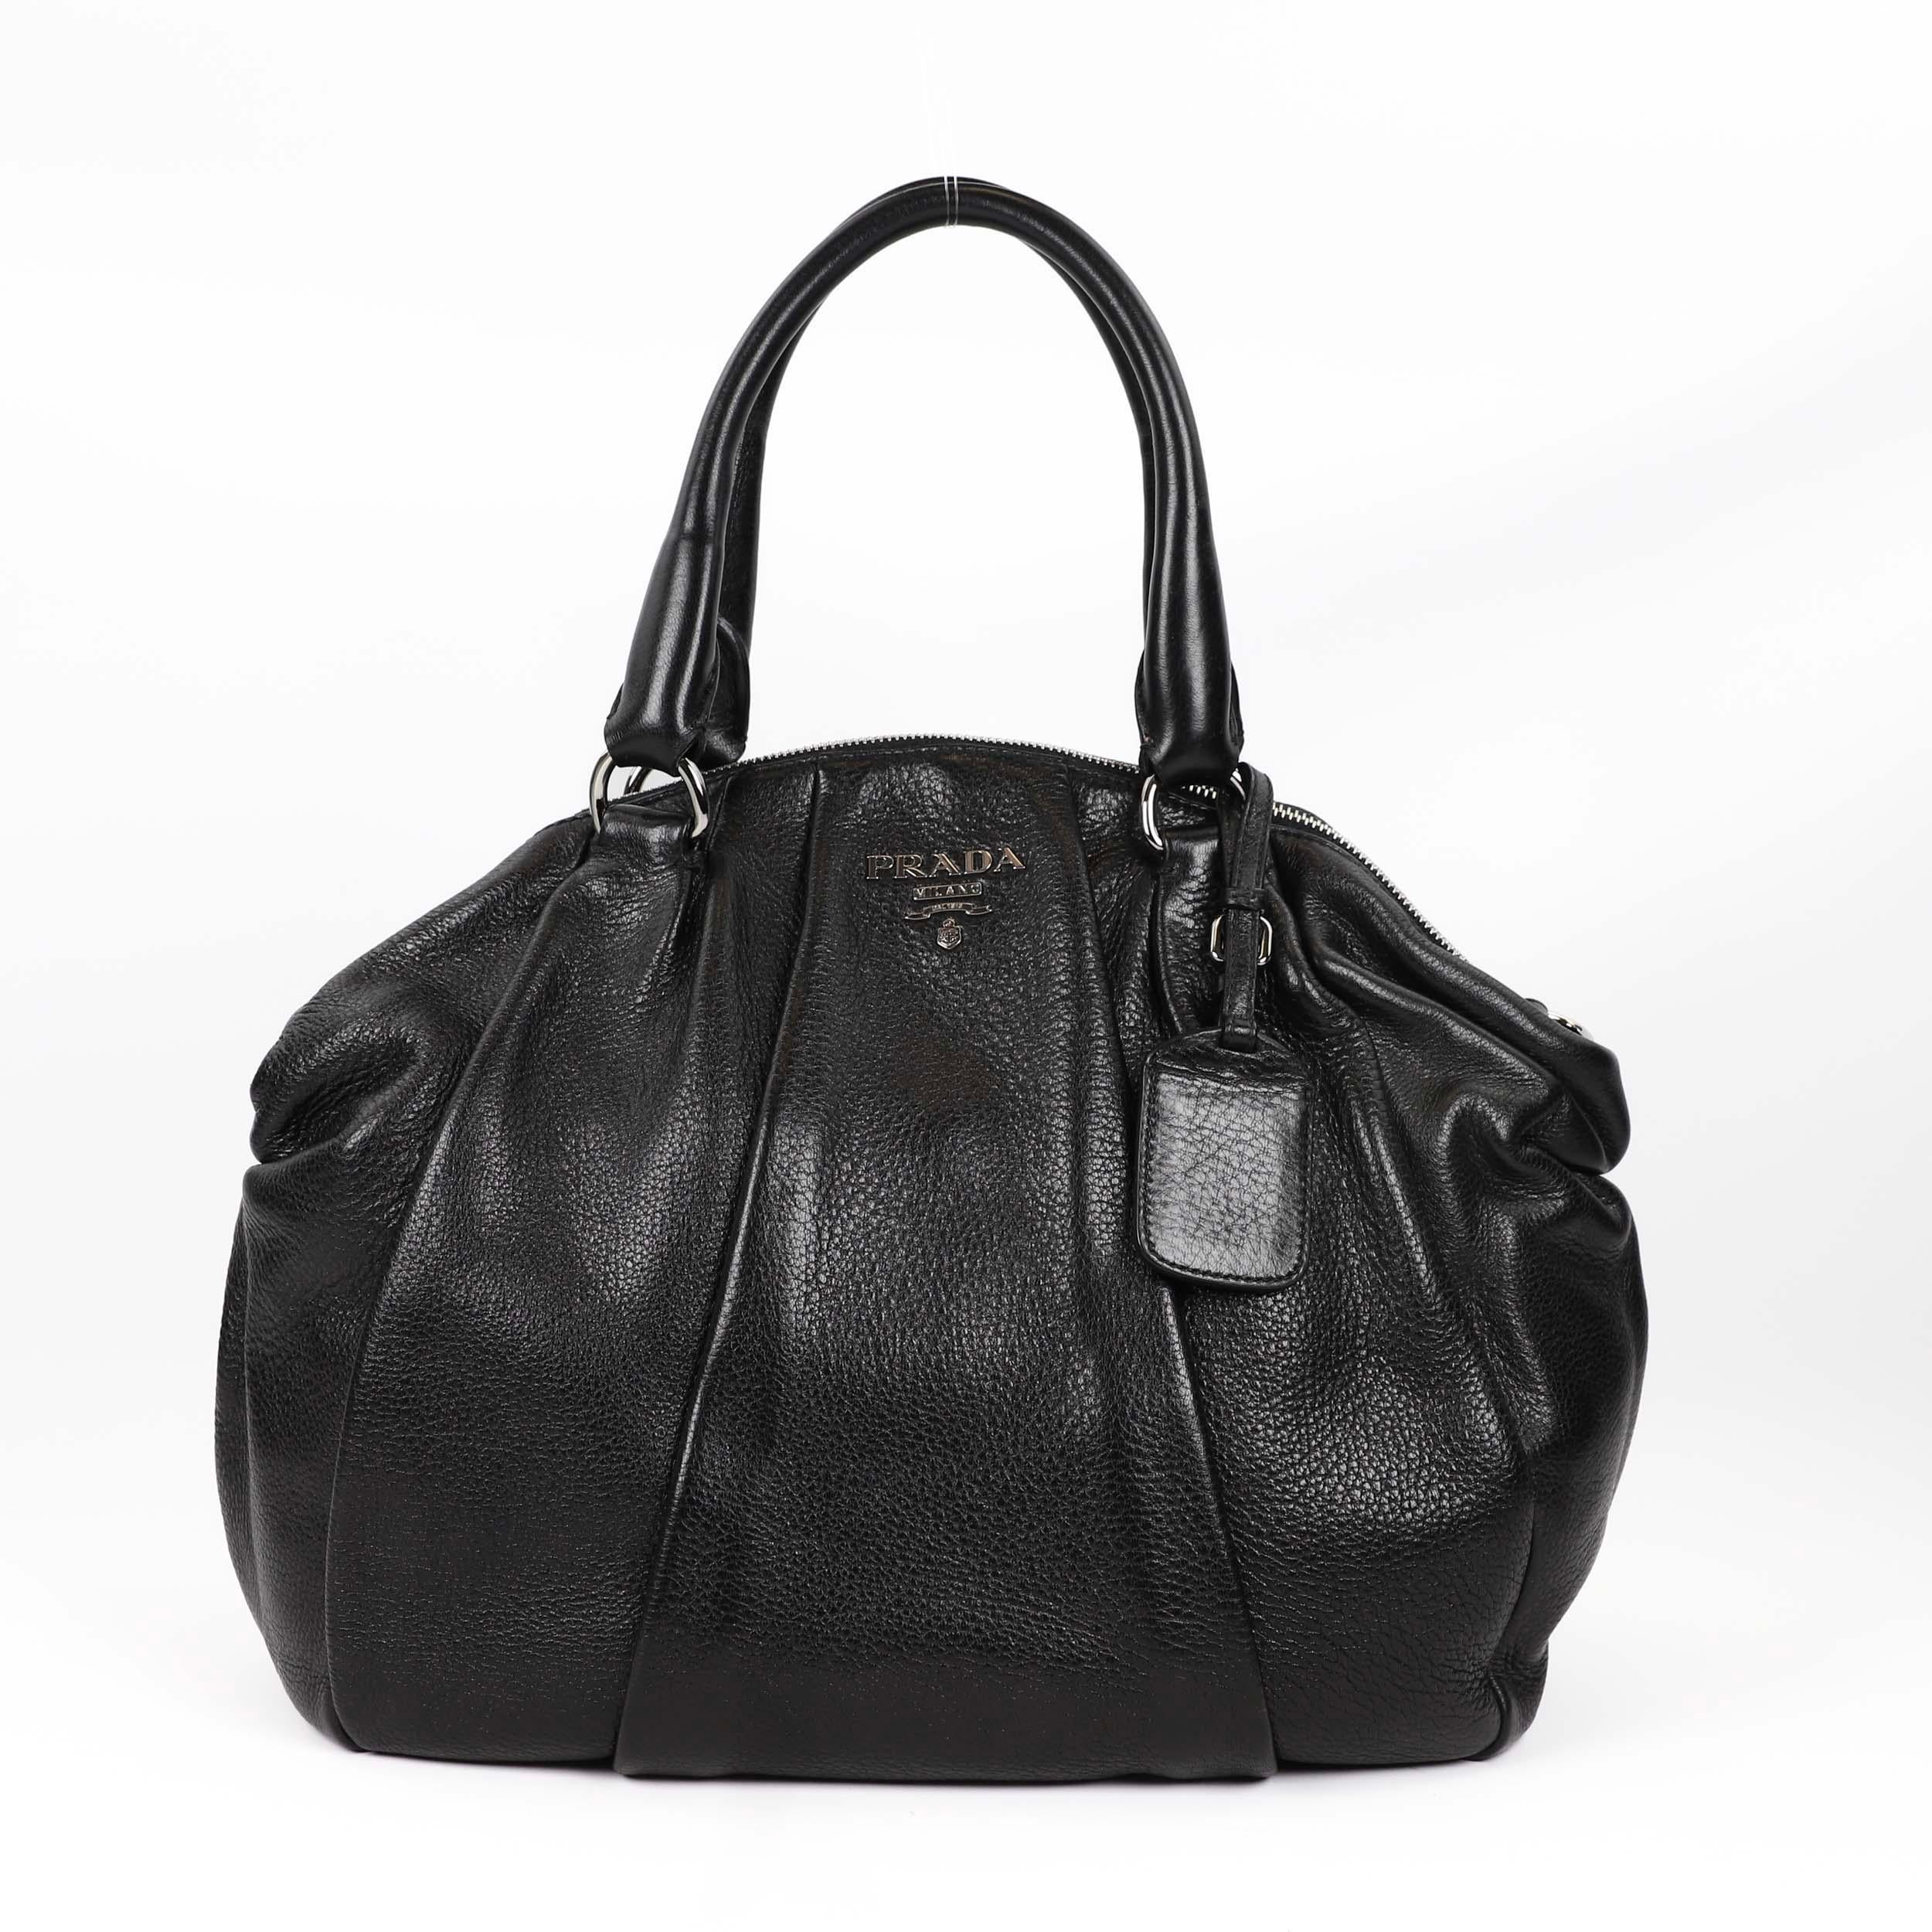 This gorgeous piece is not your usual Prada Bag - with its beautiful black colour, yet casual enough to wear every day. The sides of the bag are purposely ruffled to create that laid-back, slouchy aesthetic, which is so cool at the moment. With